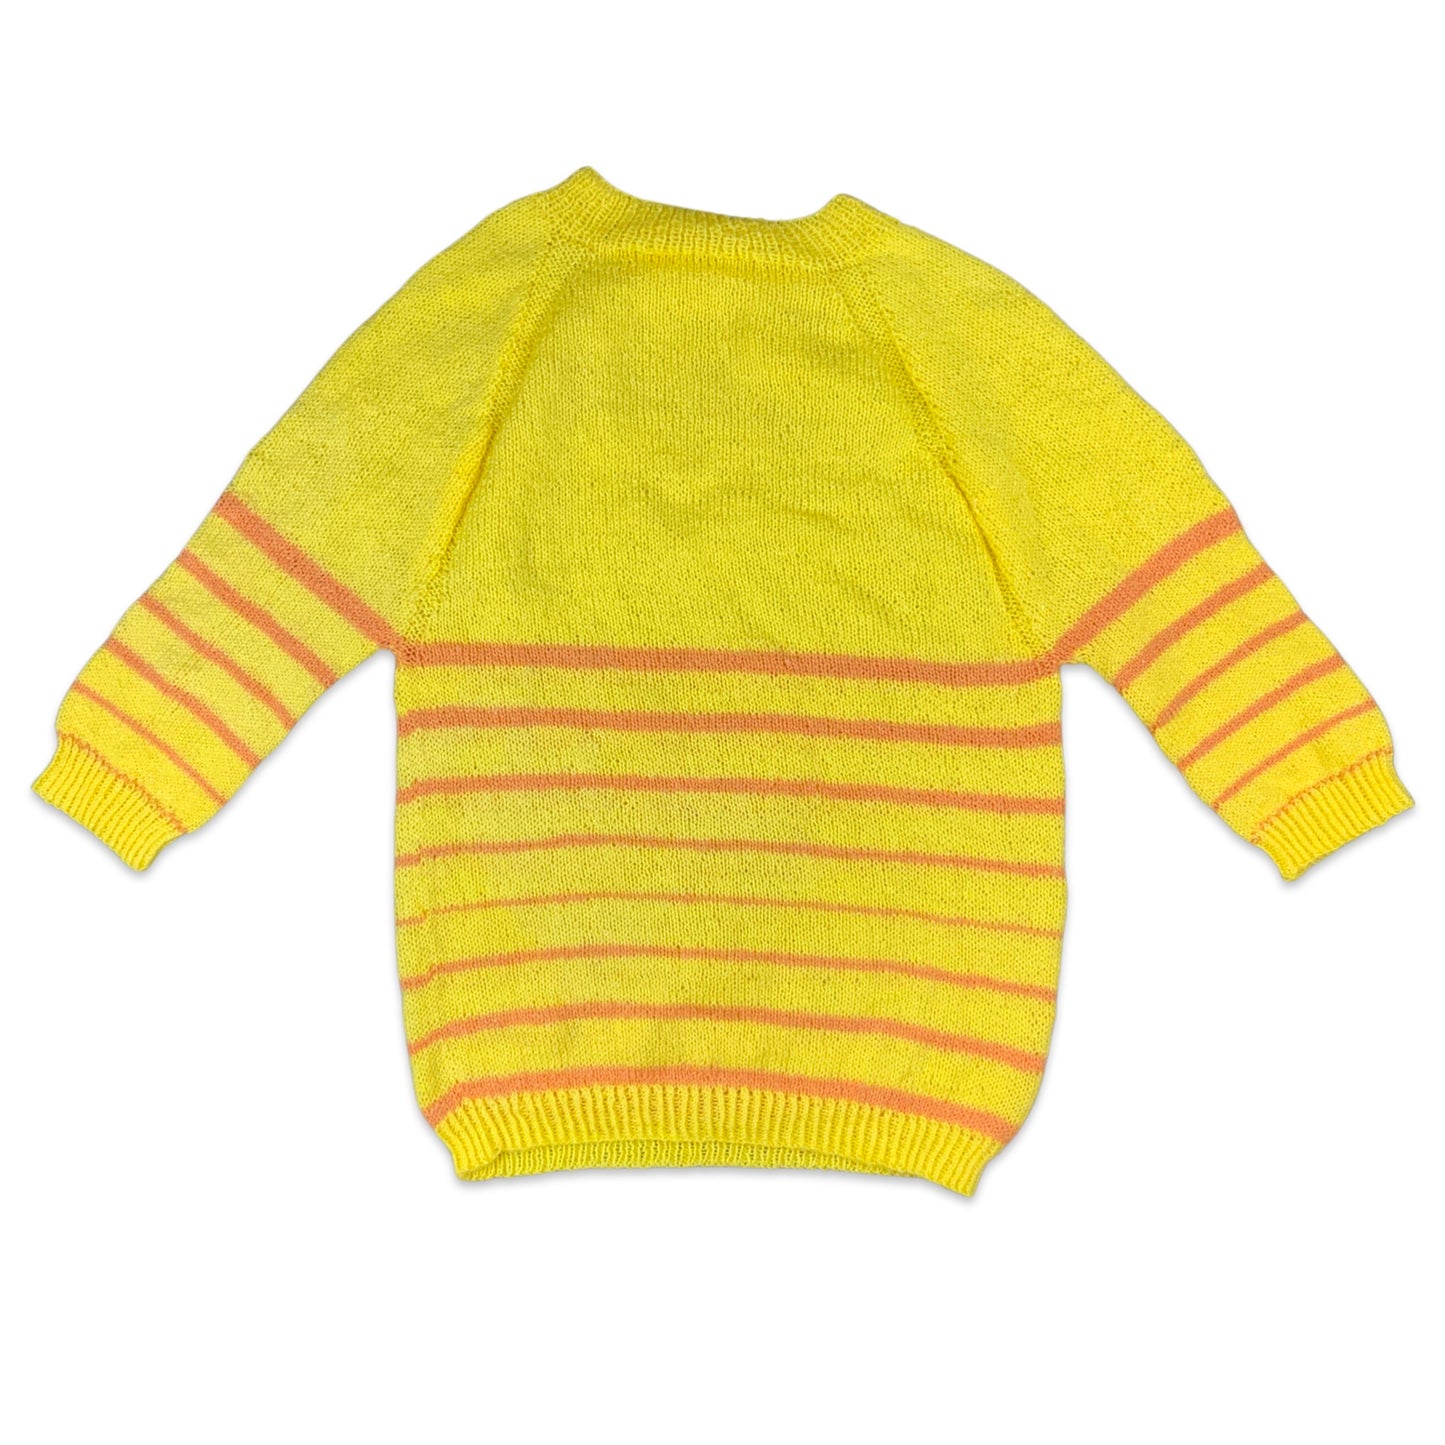 Vintage 80s Yellow & Pink Striped Knitted Jumper 8 10